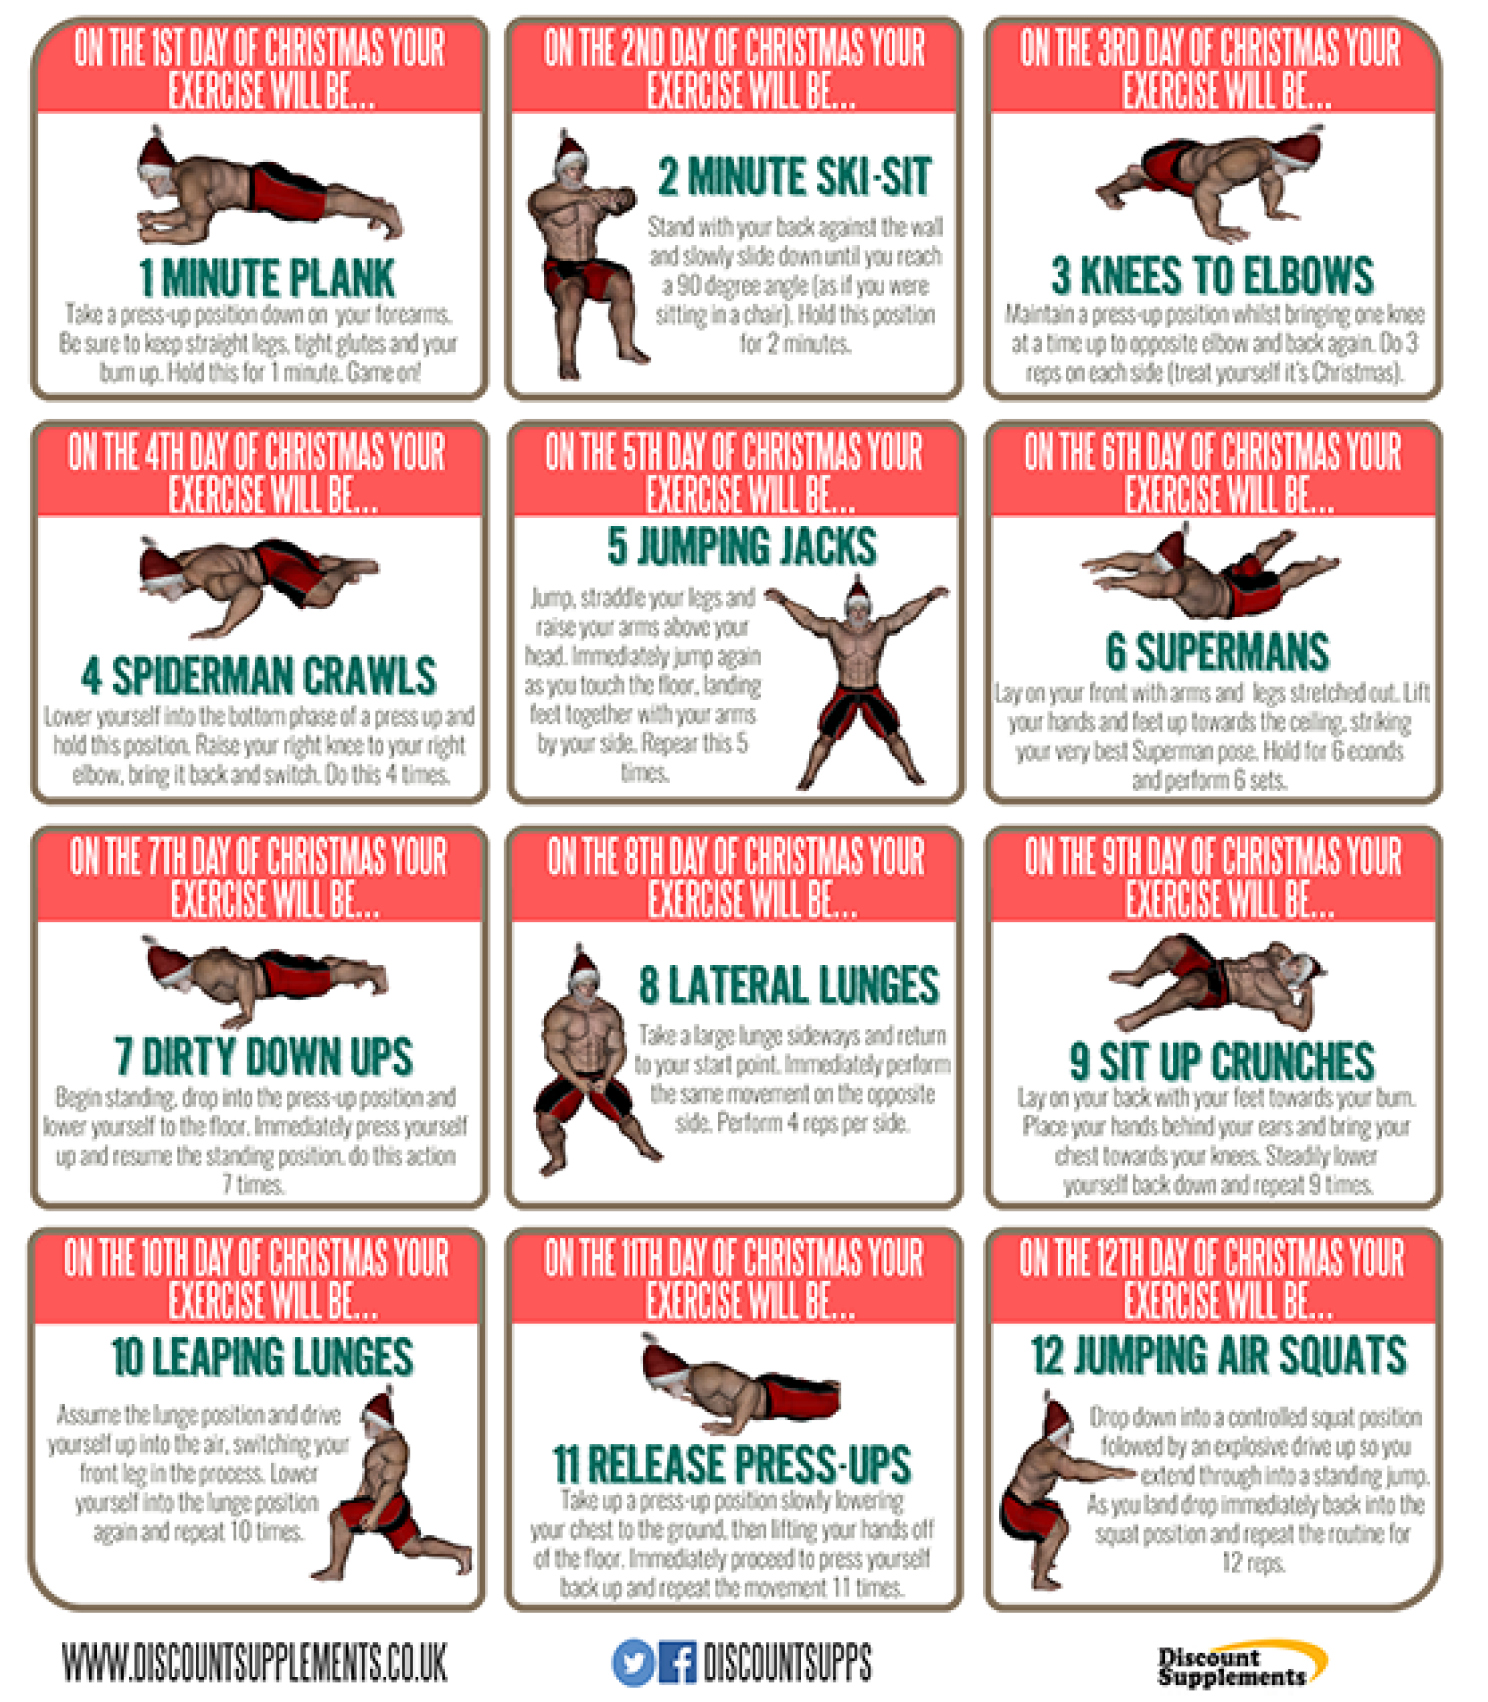 12 days of fitness